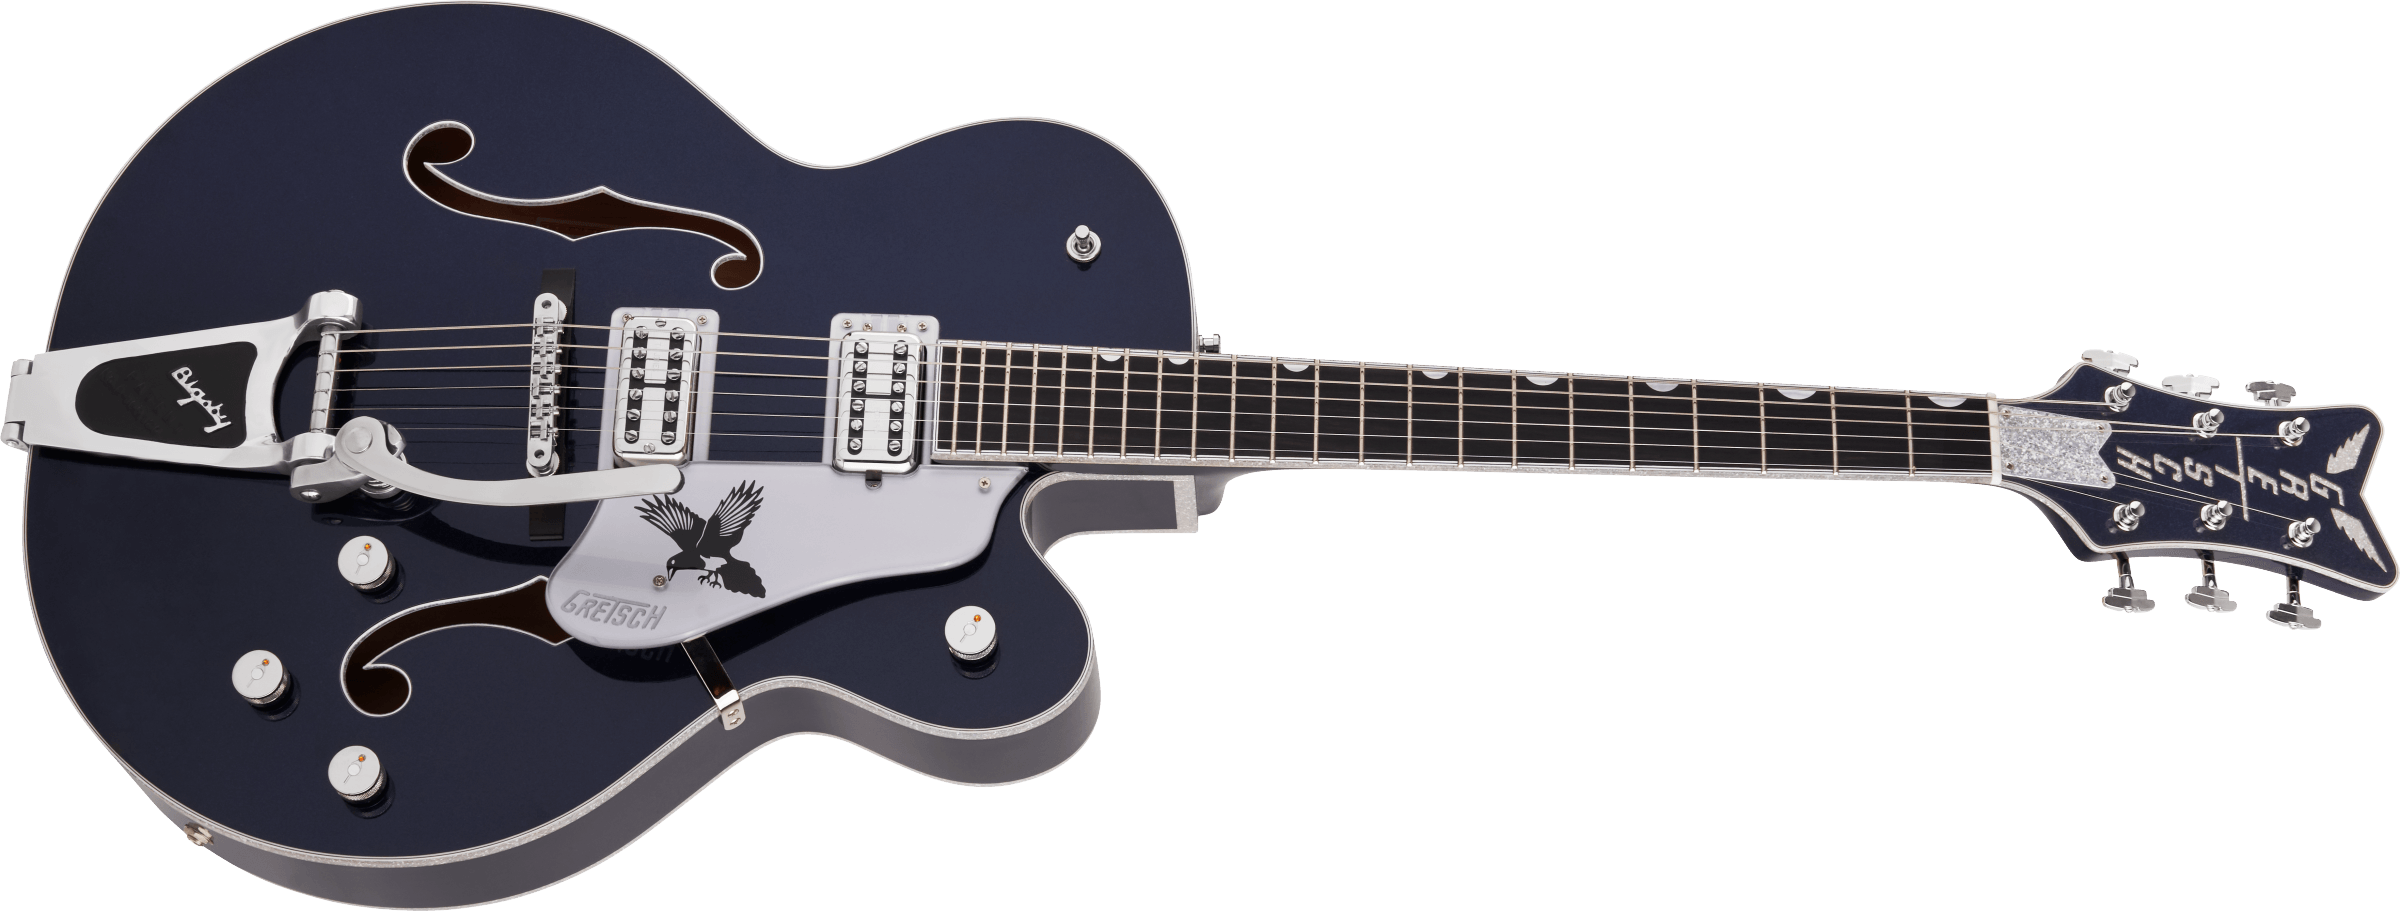 G6136T-RR Rich Robinson Signature Magpie with Bigsby, Ebony Fingerboard, Raven's Breast Blue追加画像